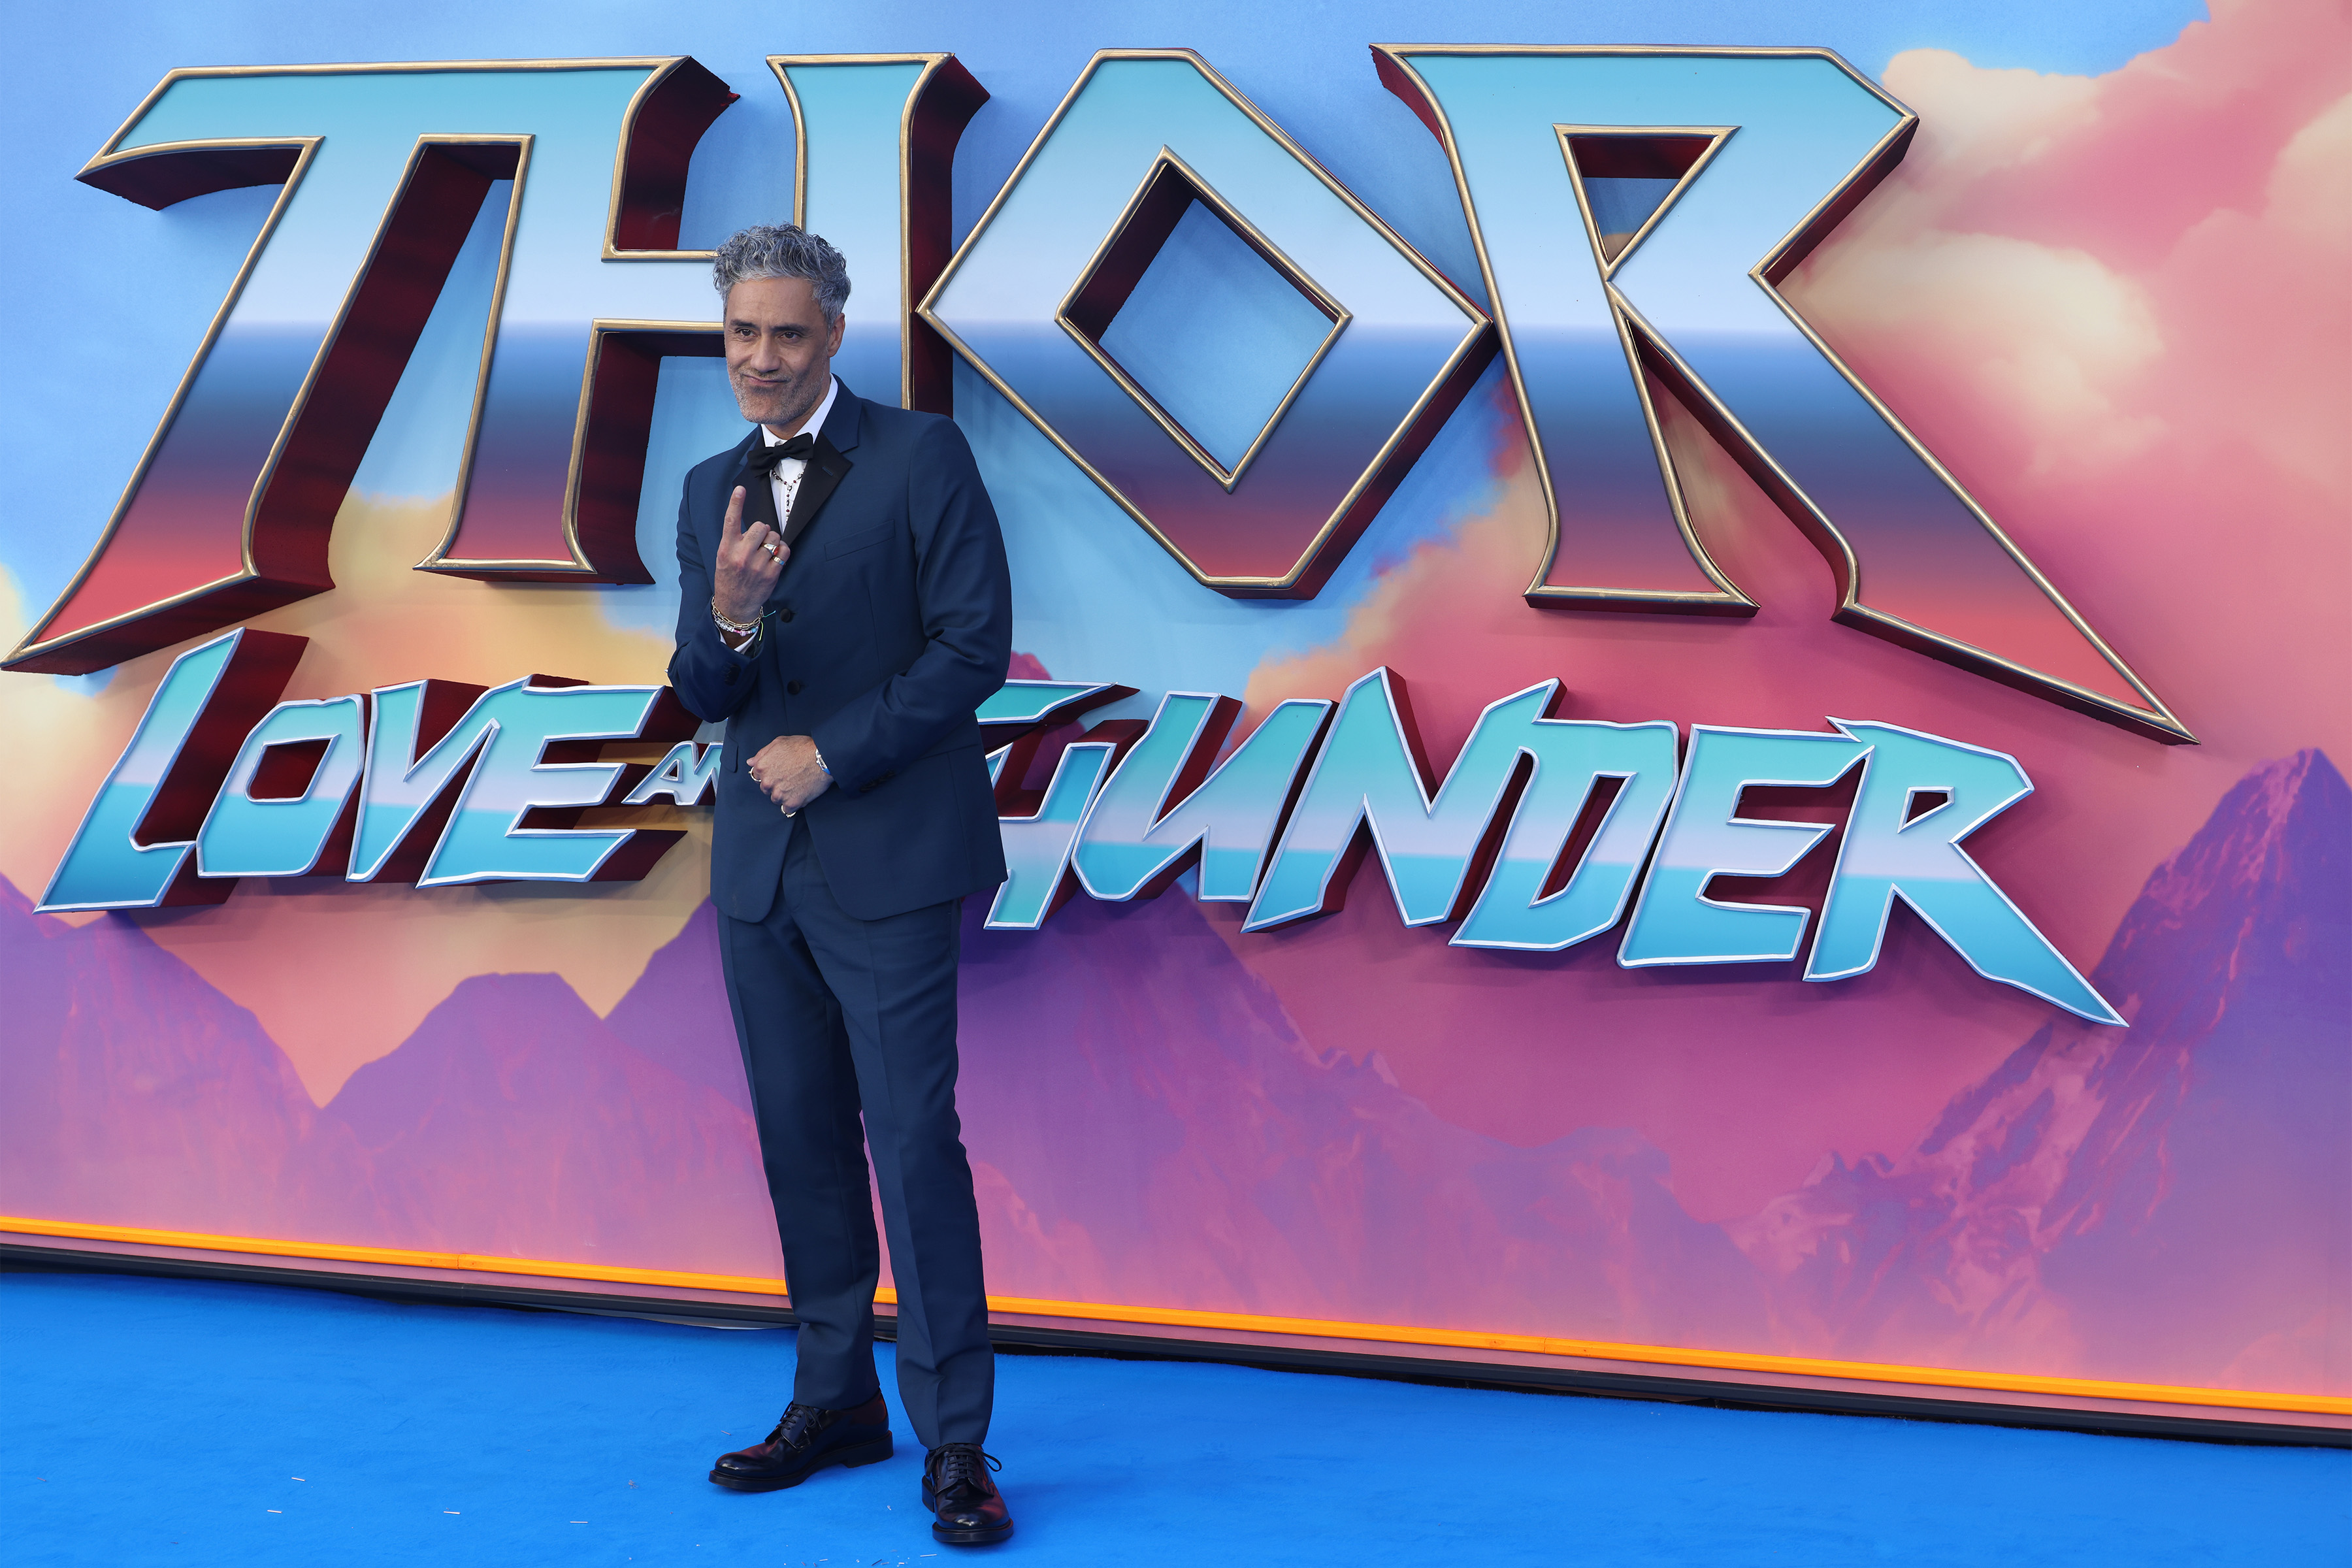 Taika Waititi, the director of 'Thor: Love and Thunder,' wears a dark blue suit while standing in front of a sign for the movie.